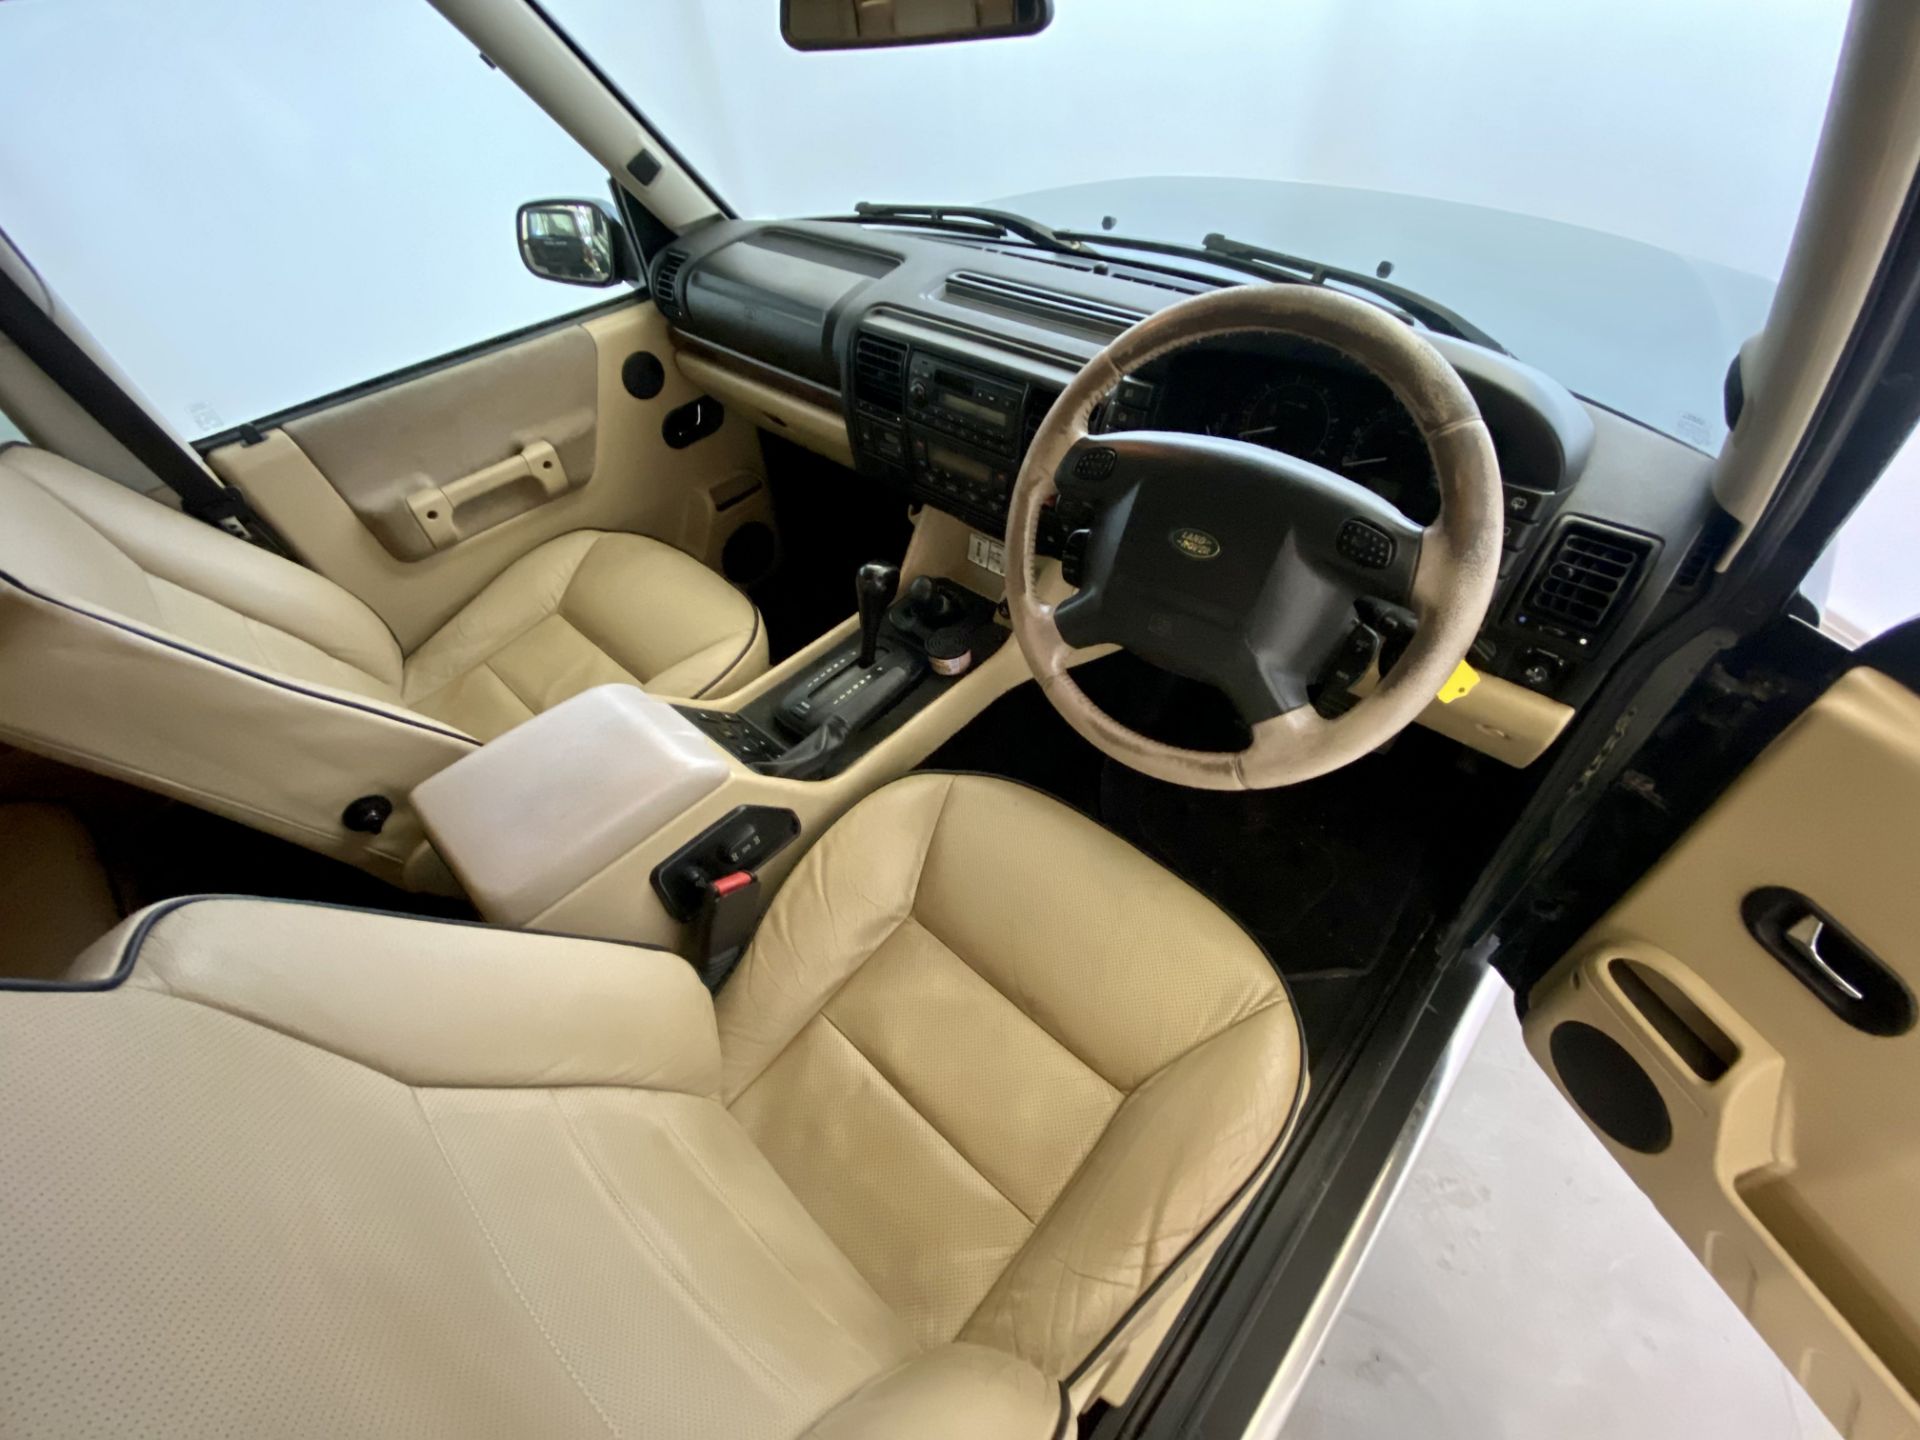 Land Rover Discovery ES TD5 - Image 21 of 32